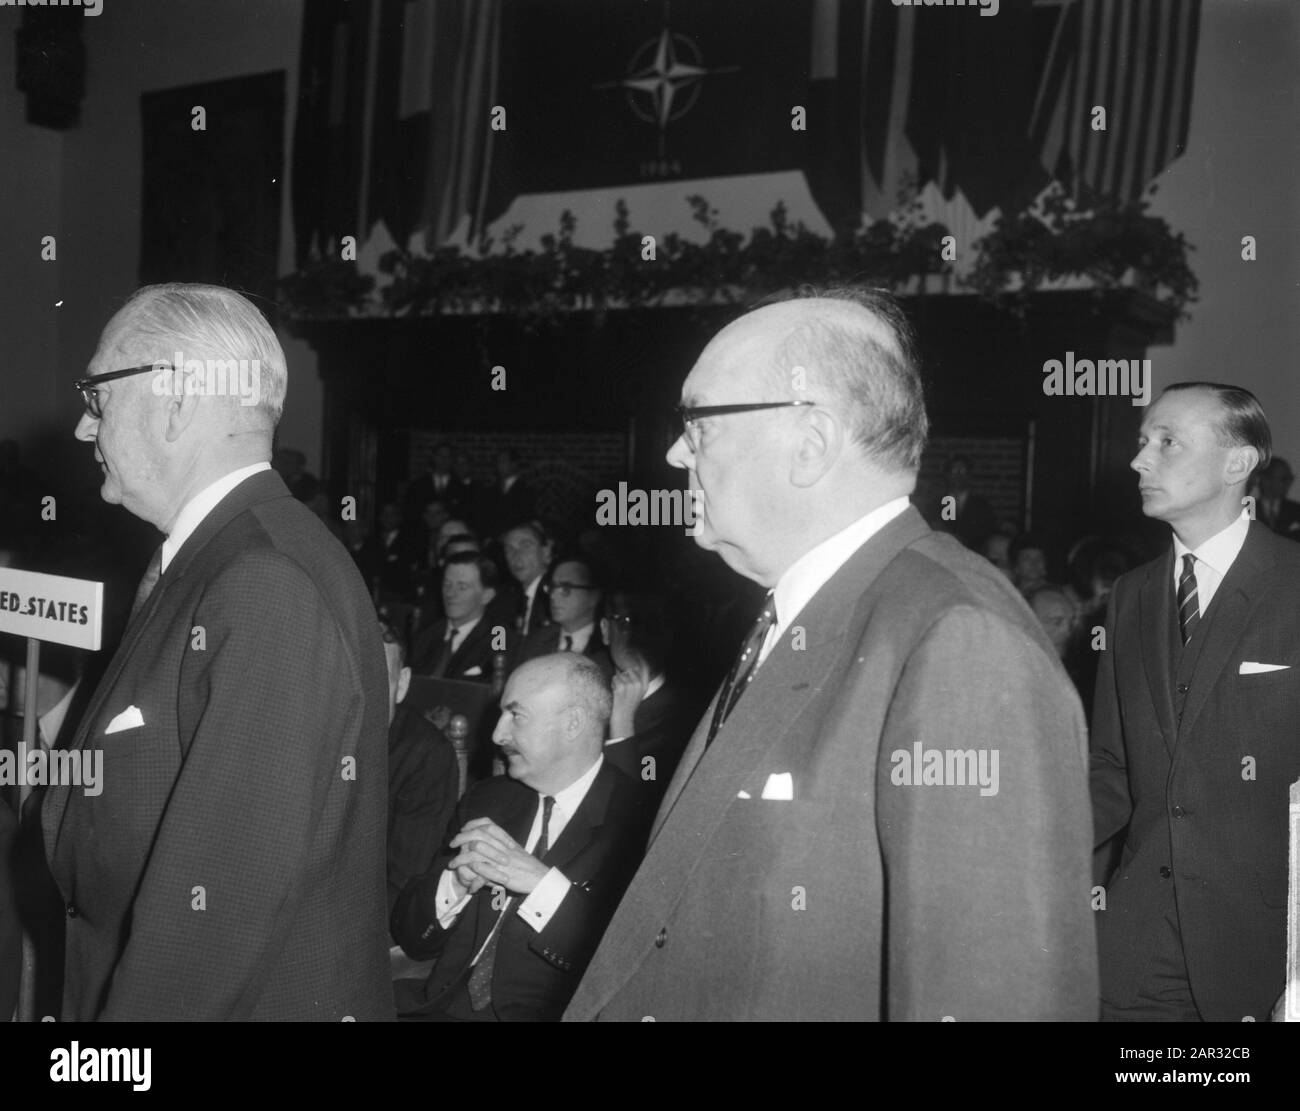 Opening NATO conference in The Hague, Haekkerup, Couve de Murville, Schroder Date: May 12, 1964 Location: The Hague, Zuid-Holland Keywords: Openings Personal name: Couve de Murville, Schroder Institution name: NATO Stock Photo